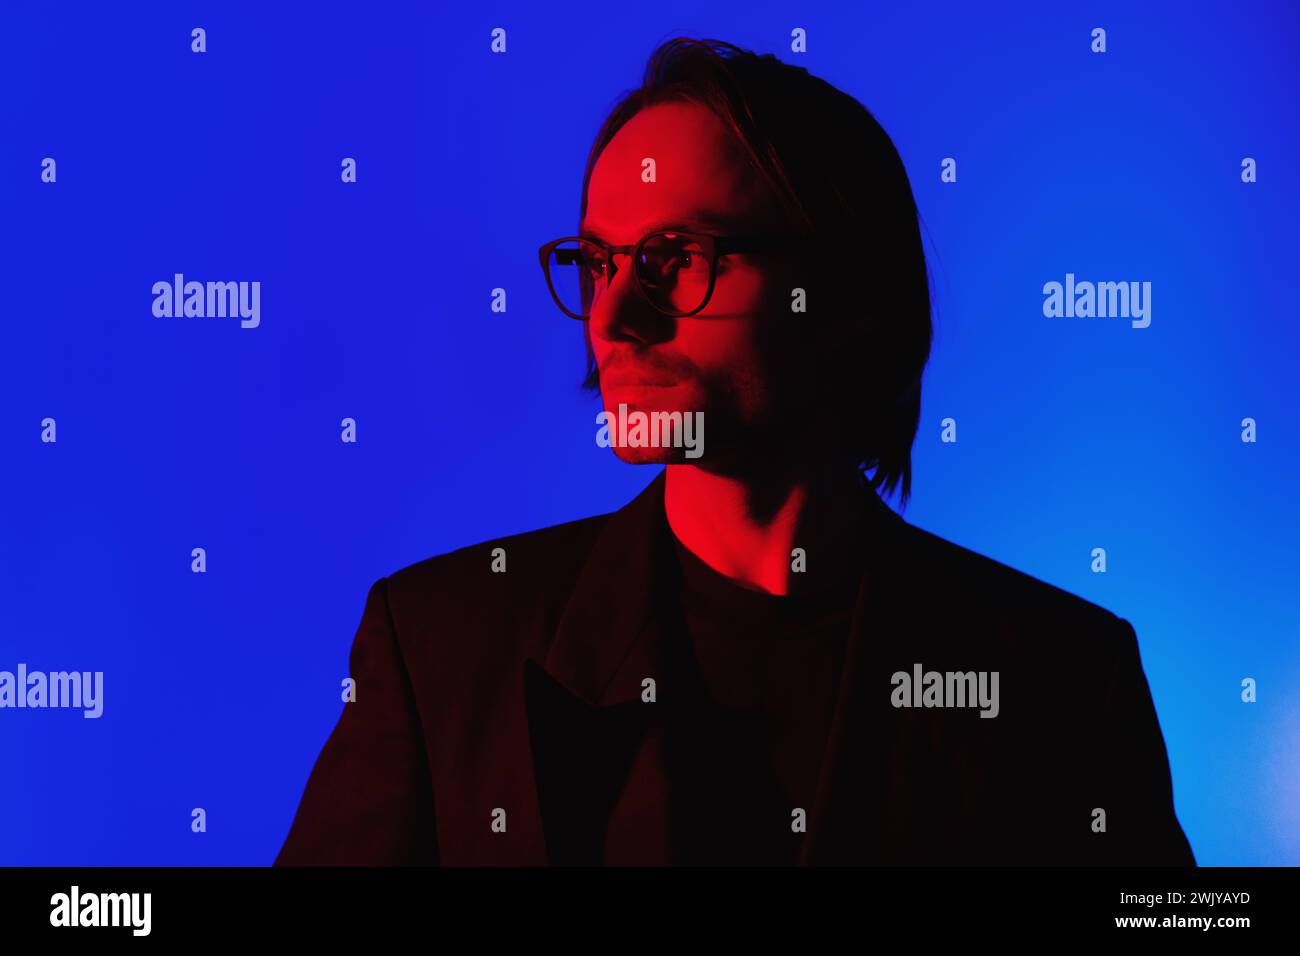 Elegant businessman in eyeglasses in a jacket standing in a dark room with illuminated Red Neon Glowing Light on their Face on a blue background Stock Photo